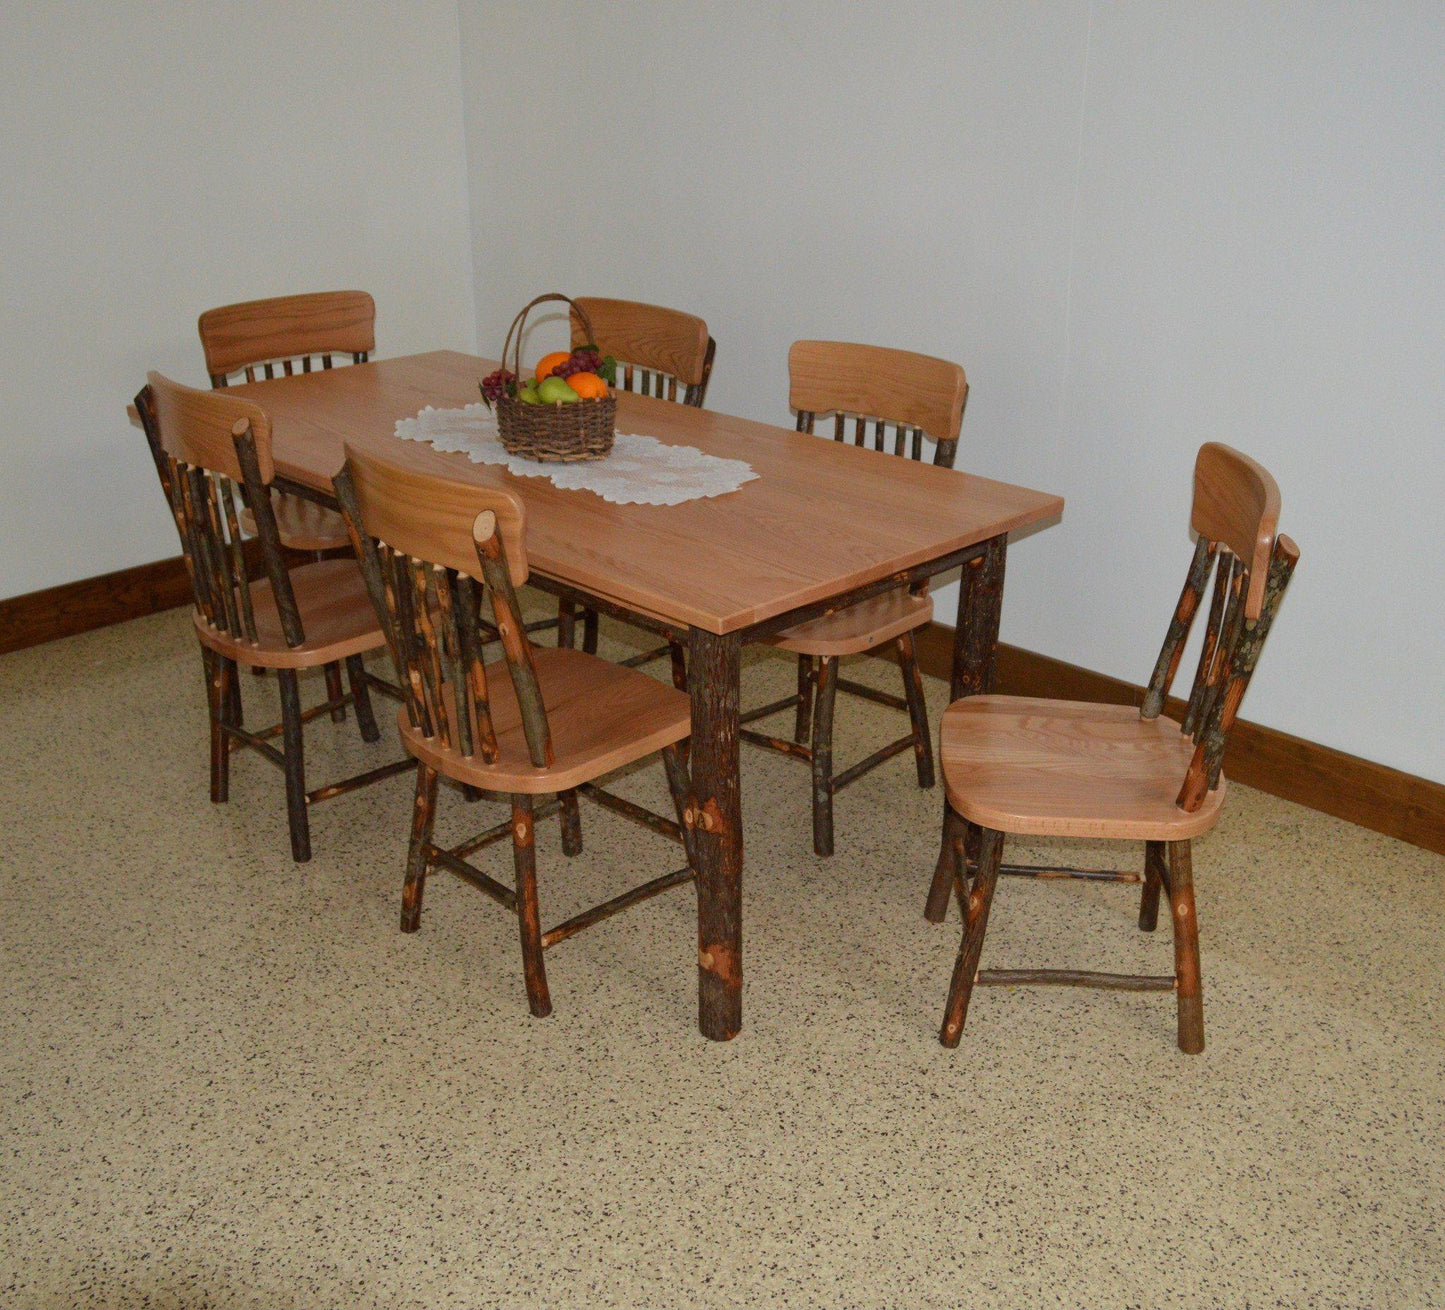 A & L Furniture Co. Hickory 7 Piece Farm Table Dining Set  - Ships FREE in 5-7 Business days - Rocking Furniture